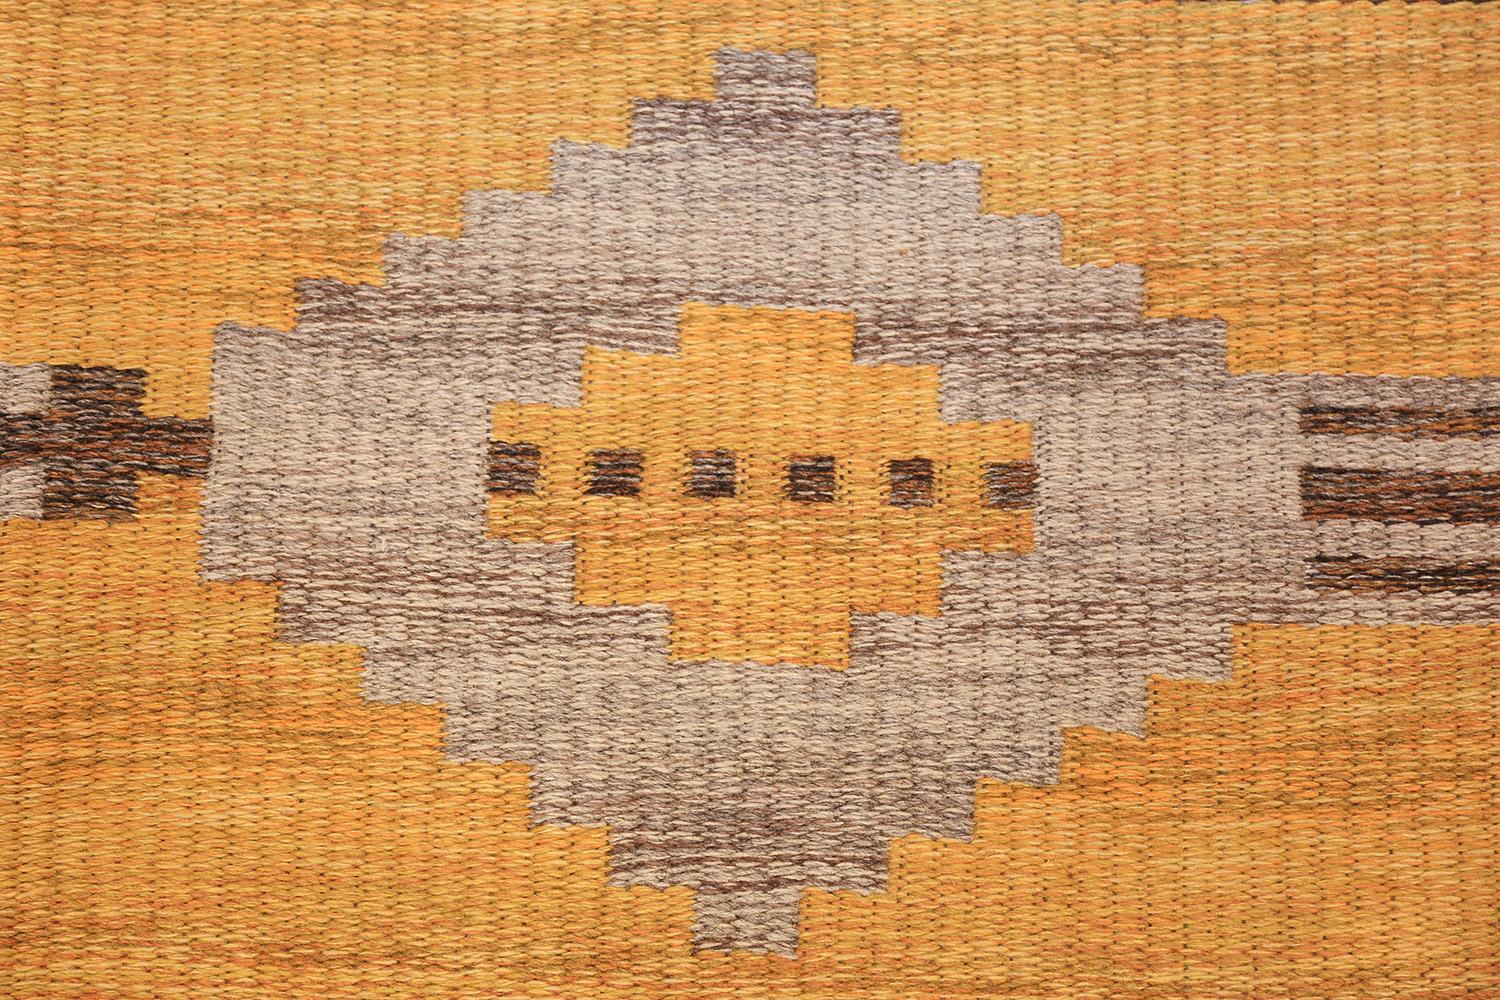 20th Century Vintage Double-Sided Swedish Kilim Rug. Size: 5 ft x 7 ft 8 in (1.52 m x 2.34 m)